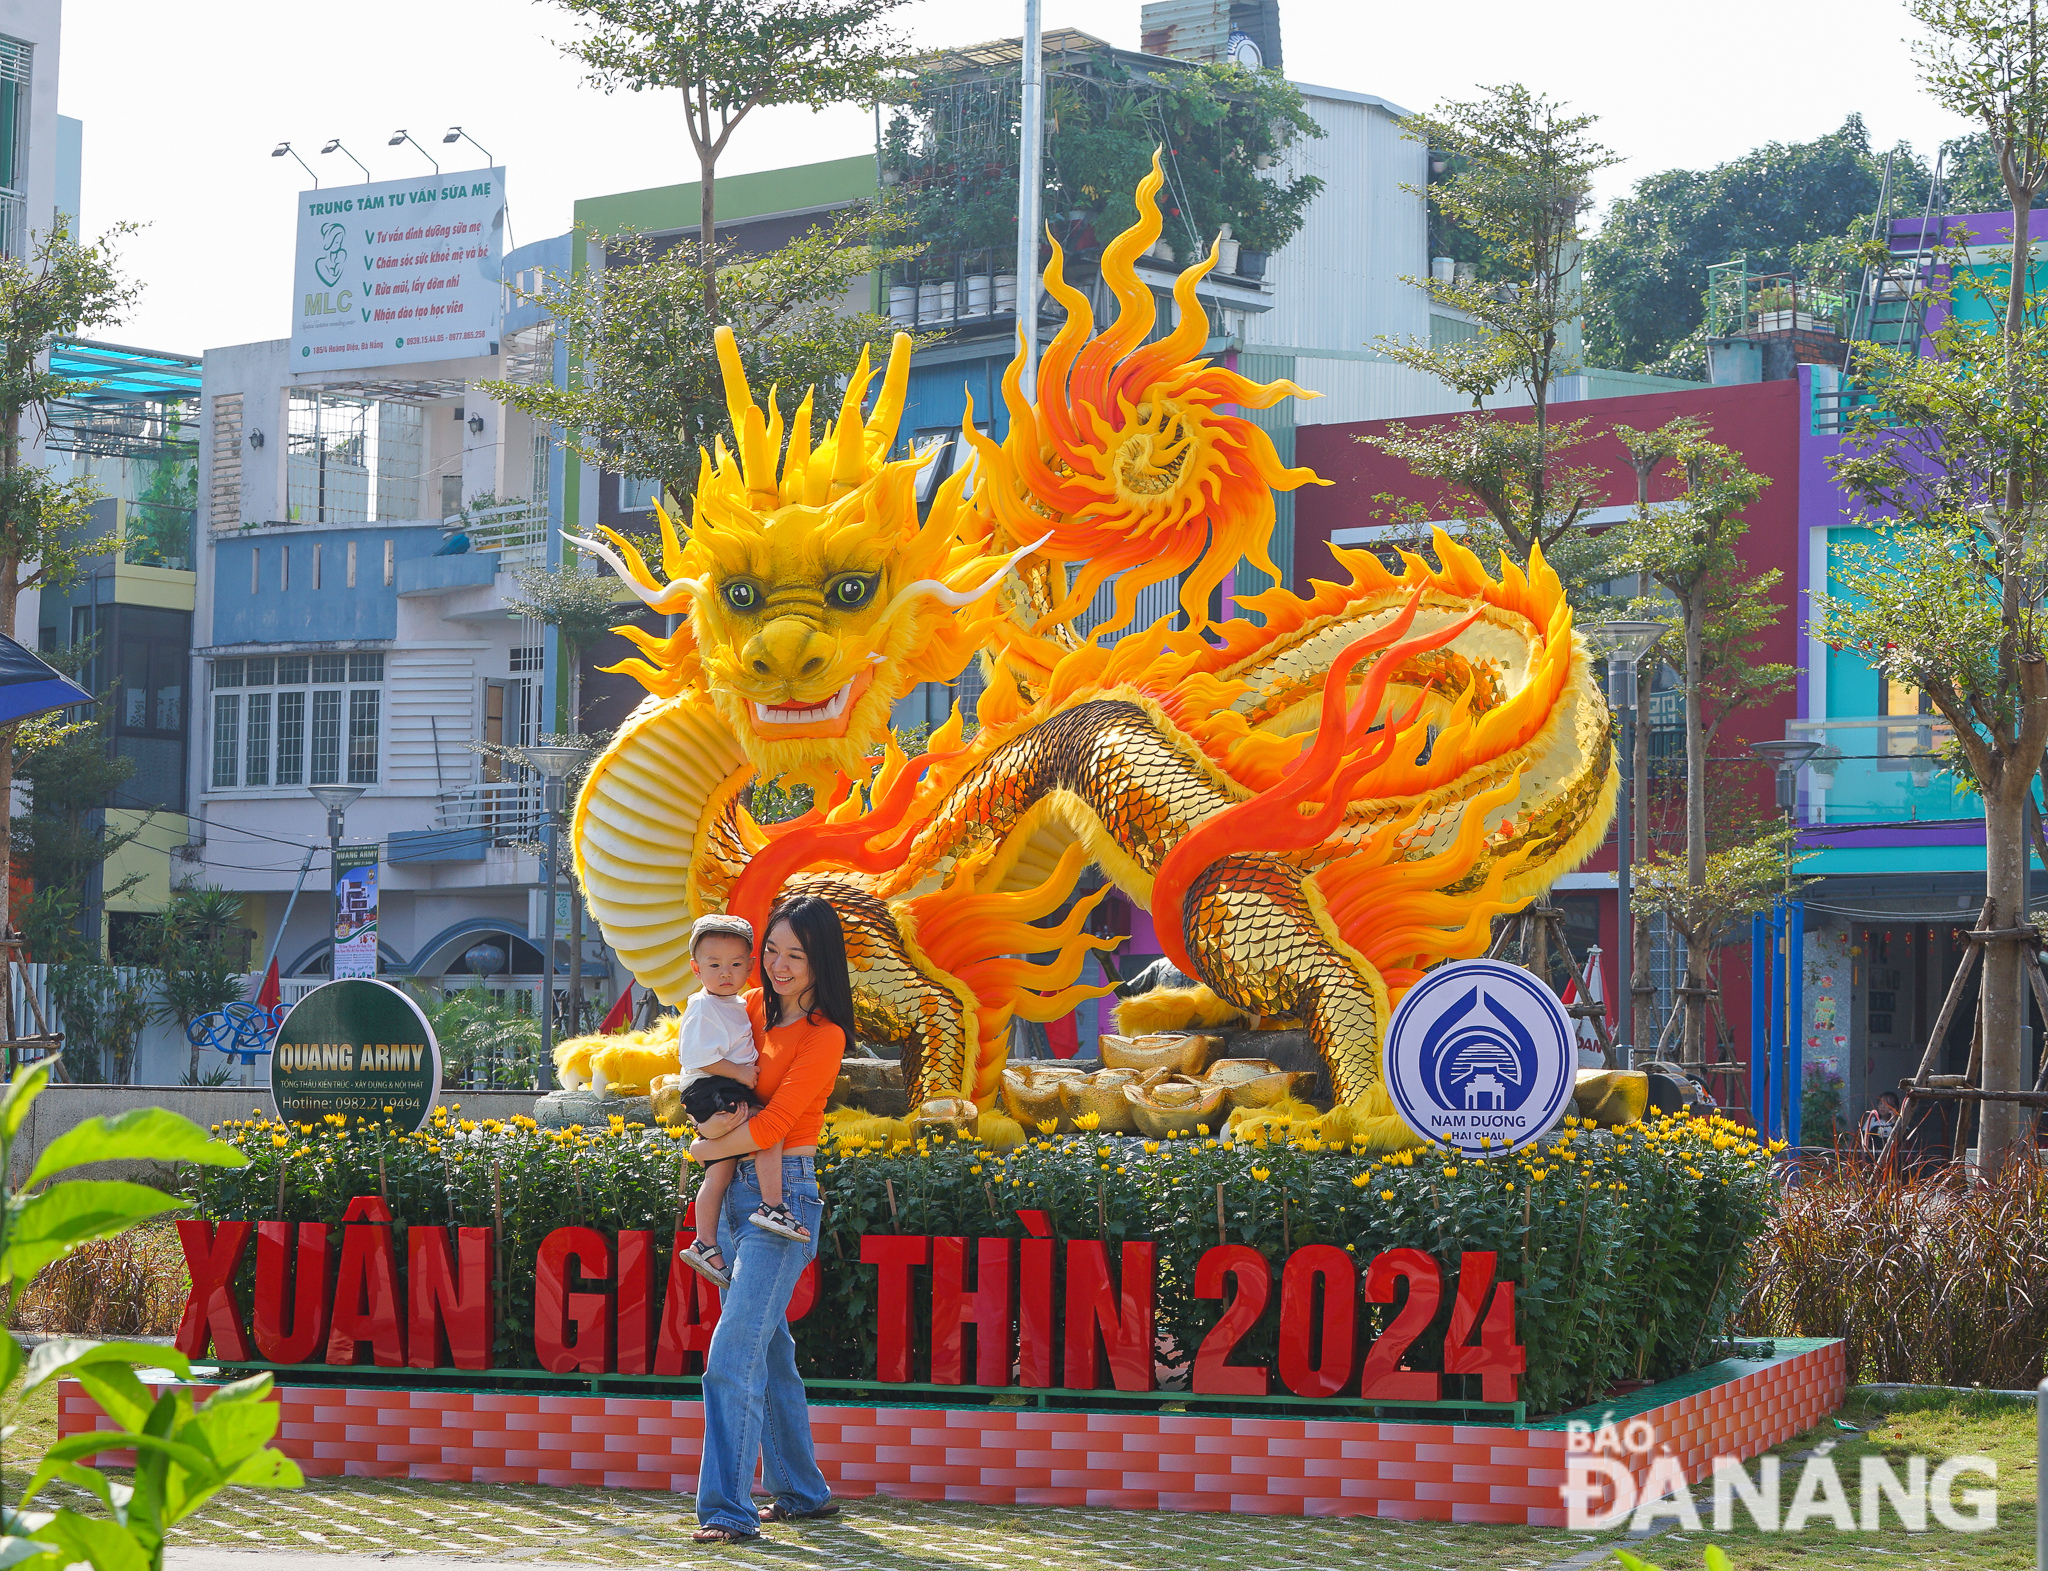 The Dragon mascot installed at the flower garden in Nam Duong Ward, Hai Chau District, was created by artist Dinh Van Tam from Quang Tri - who is famous for his lively zodiac animal mascot statues.